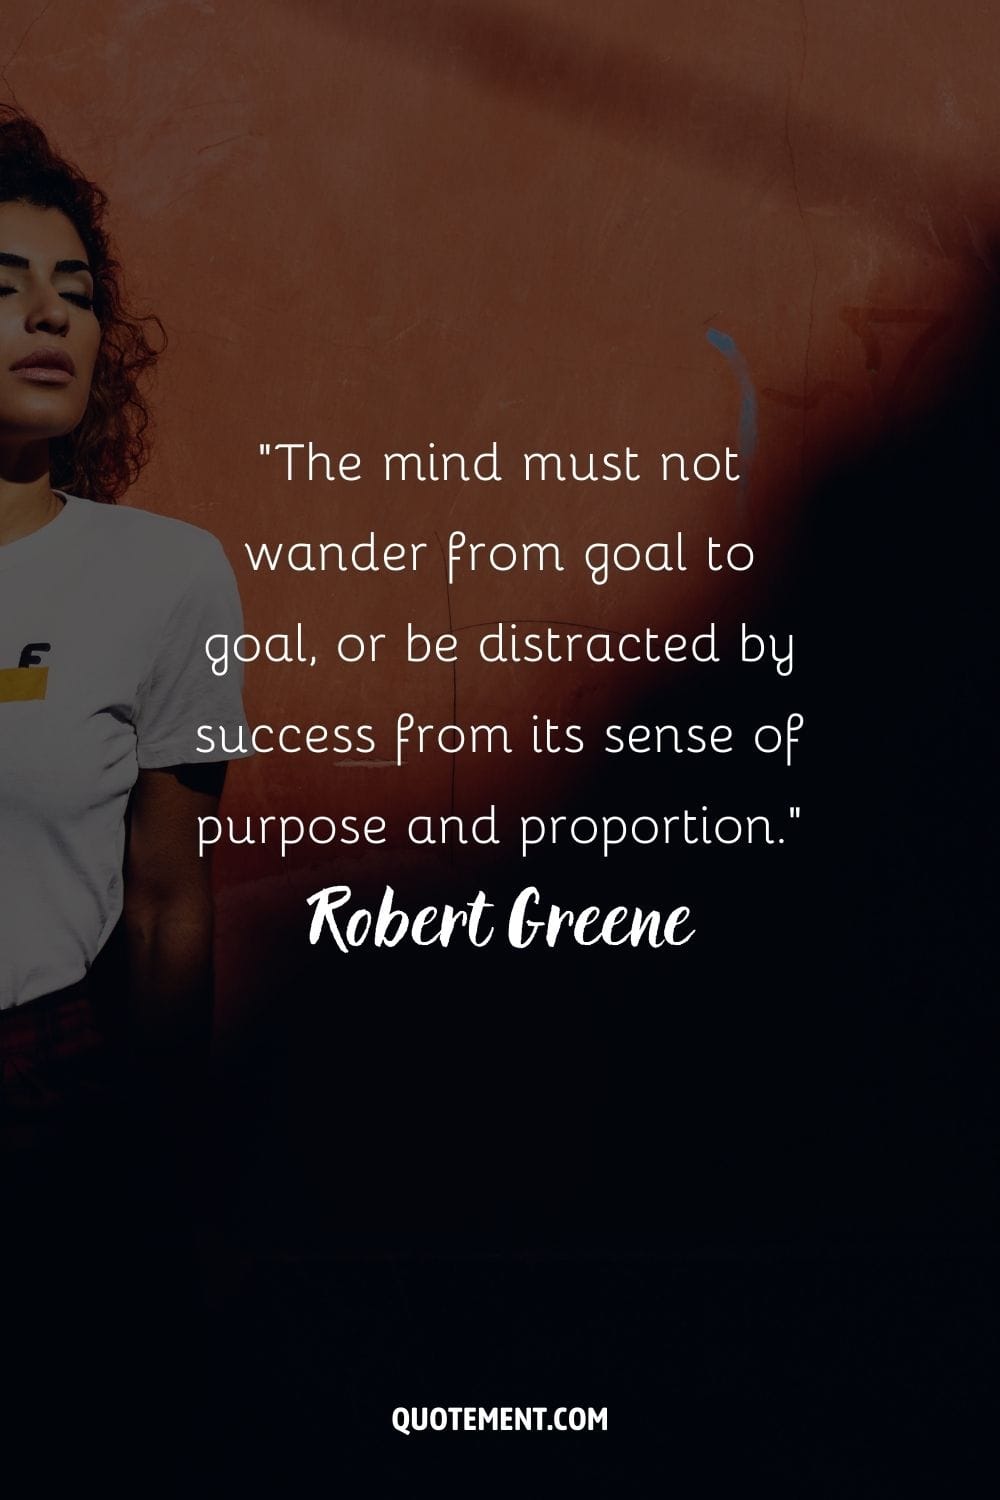 “The mind must not wander from goal to goal, or be distracted by success from its sense of purpose and proportion.” ― Robert Greene, The 48 Laws of Power